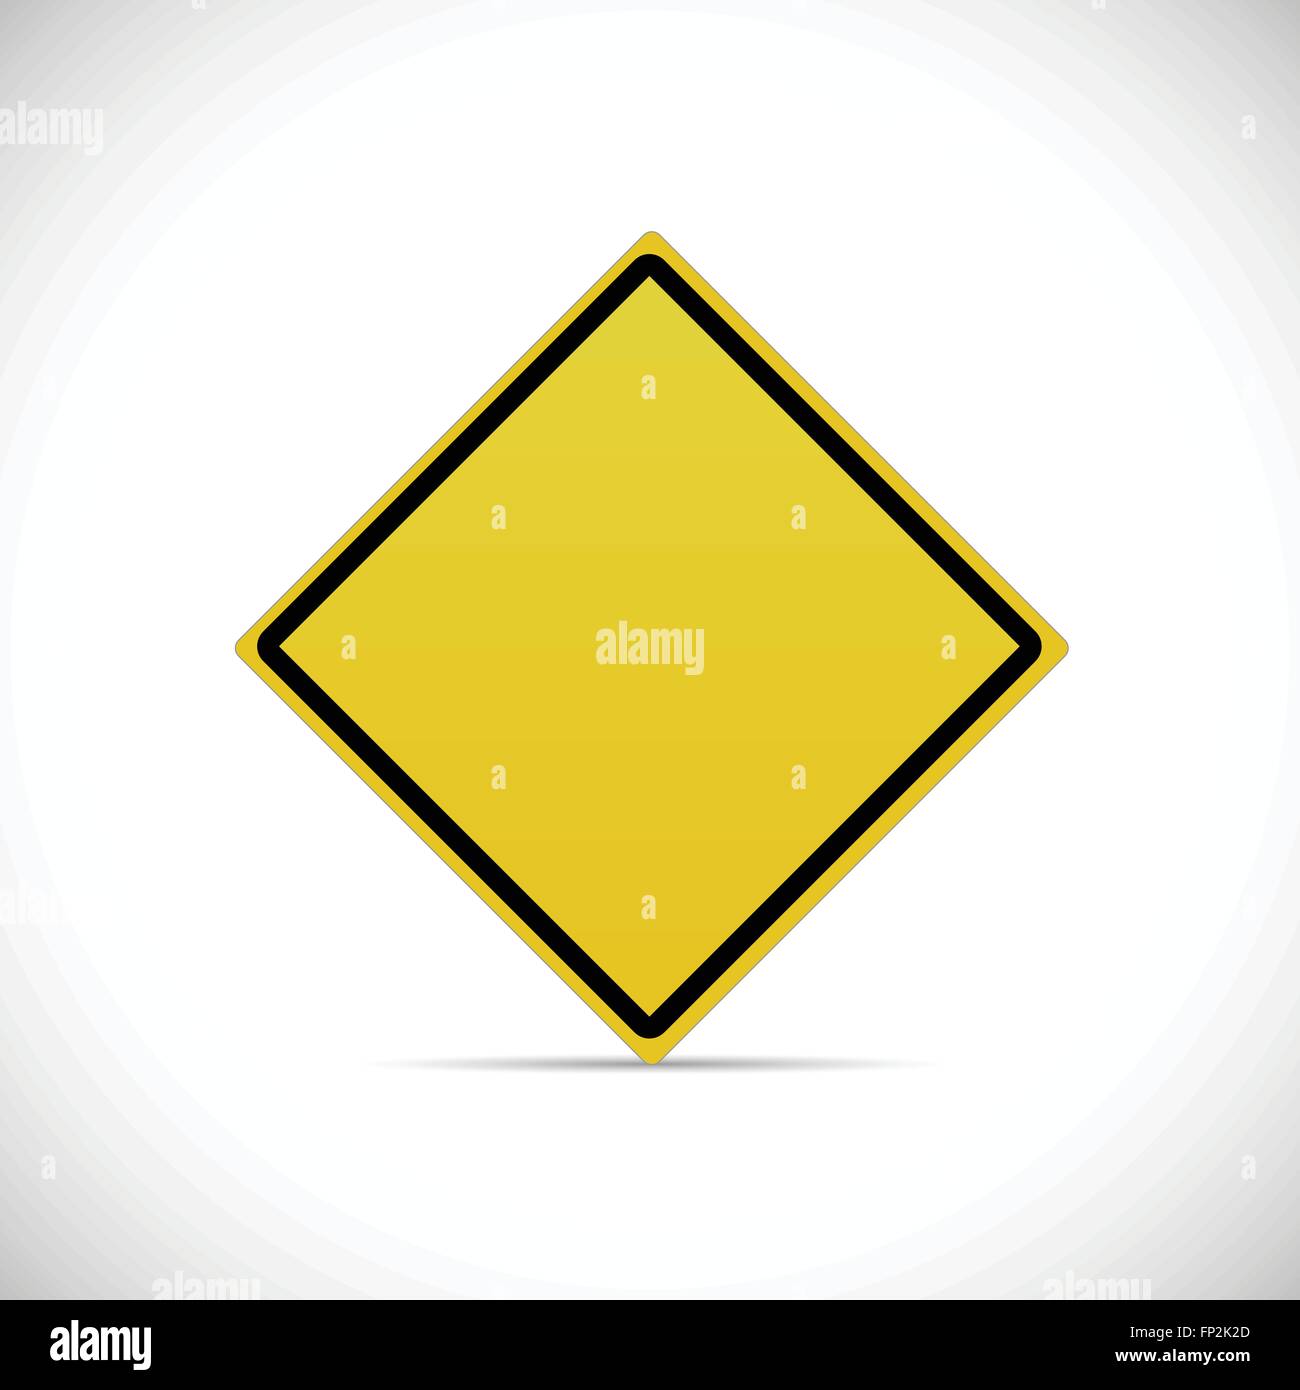 Illustration of a blank yellow road sign isolated on a white background. Stock Vector